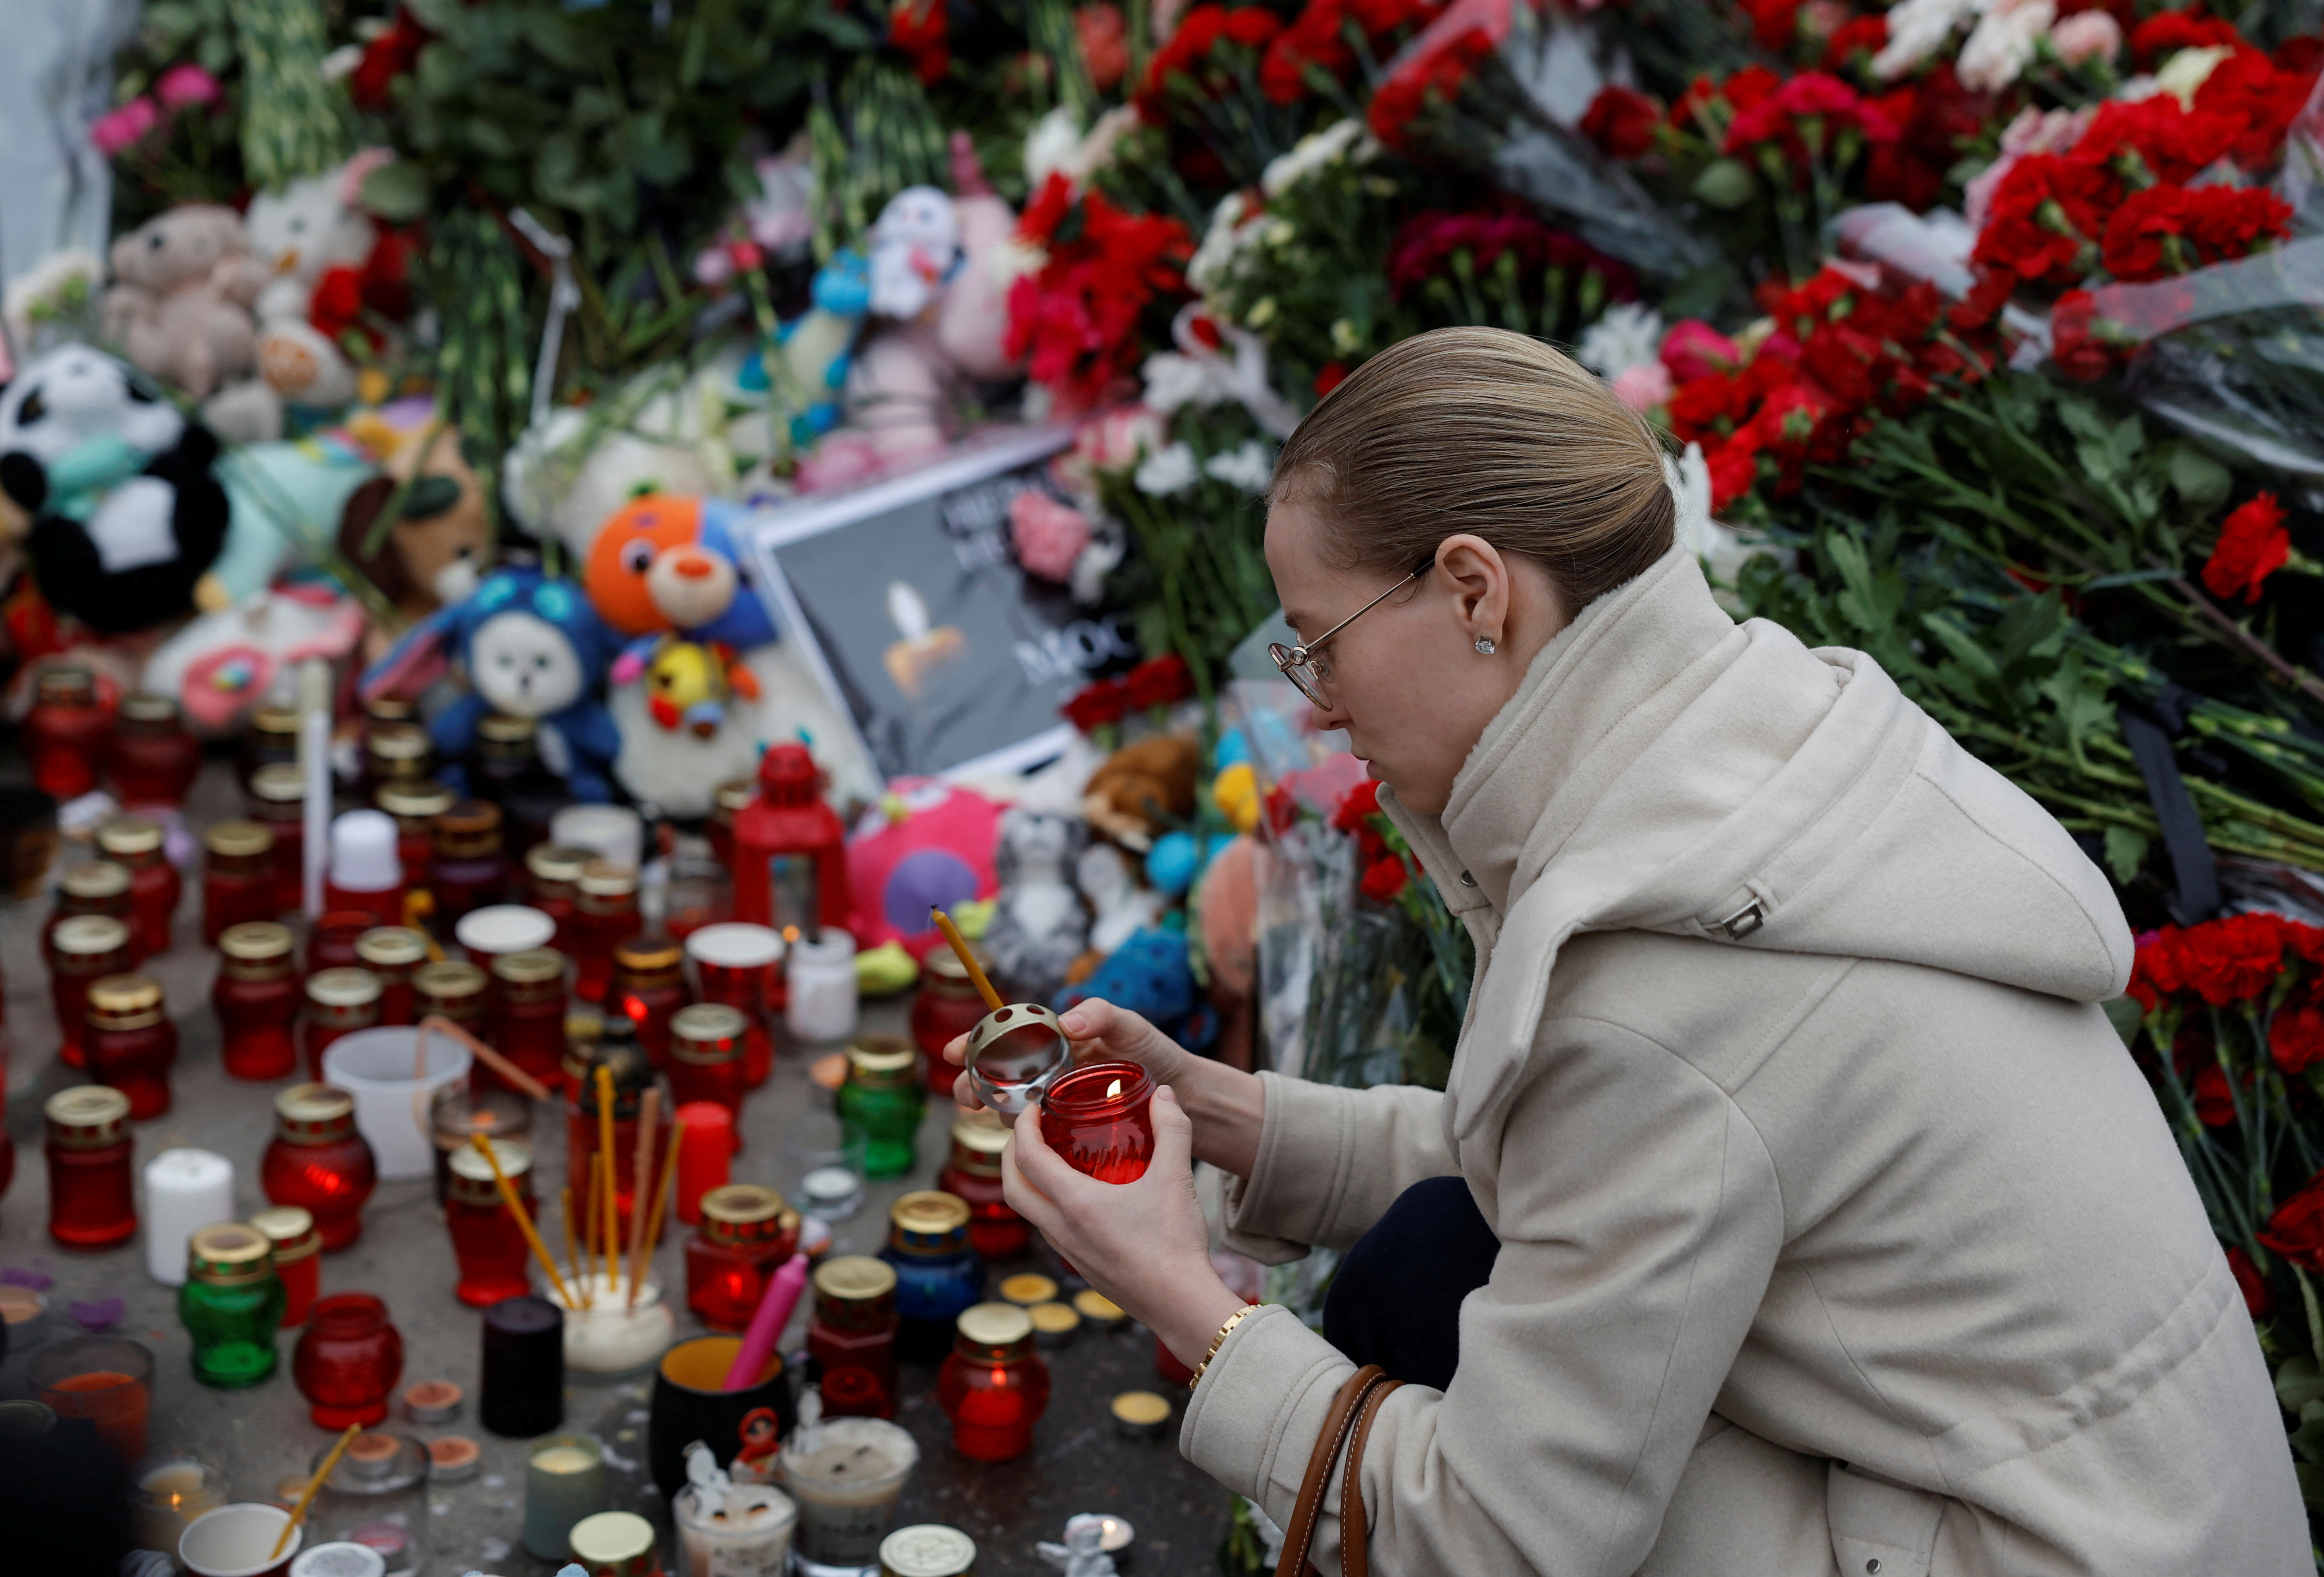 A makeshift memorial to the victims of a shooting attack set up outside the Crocus City Hall concert venue in the Moscow Region